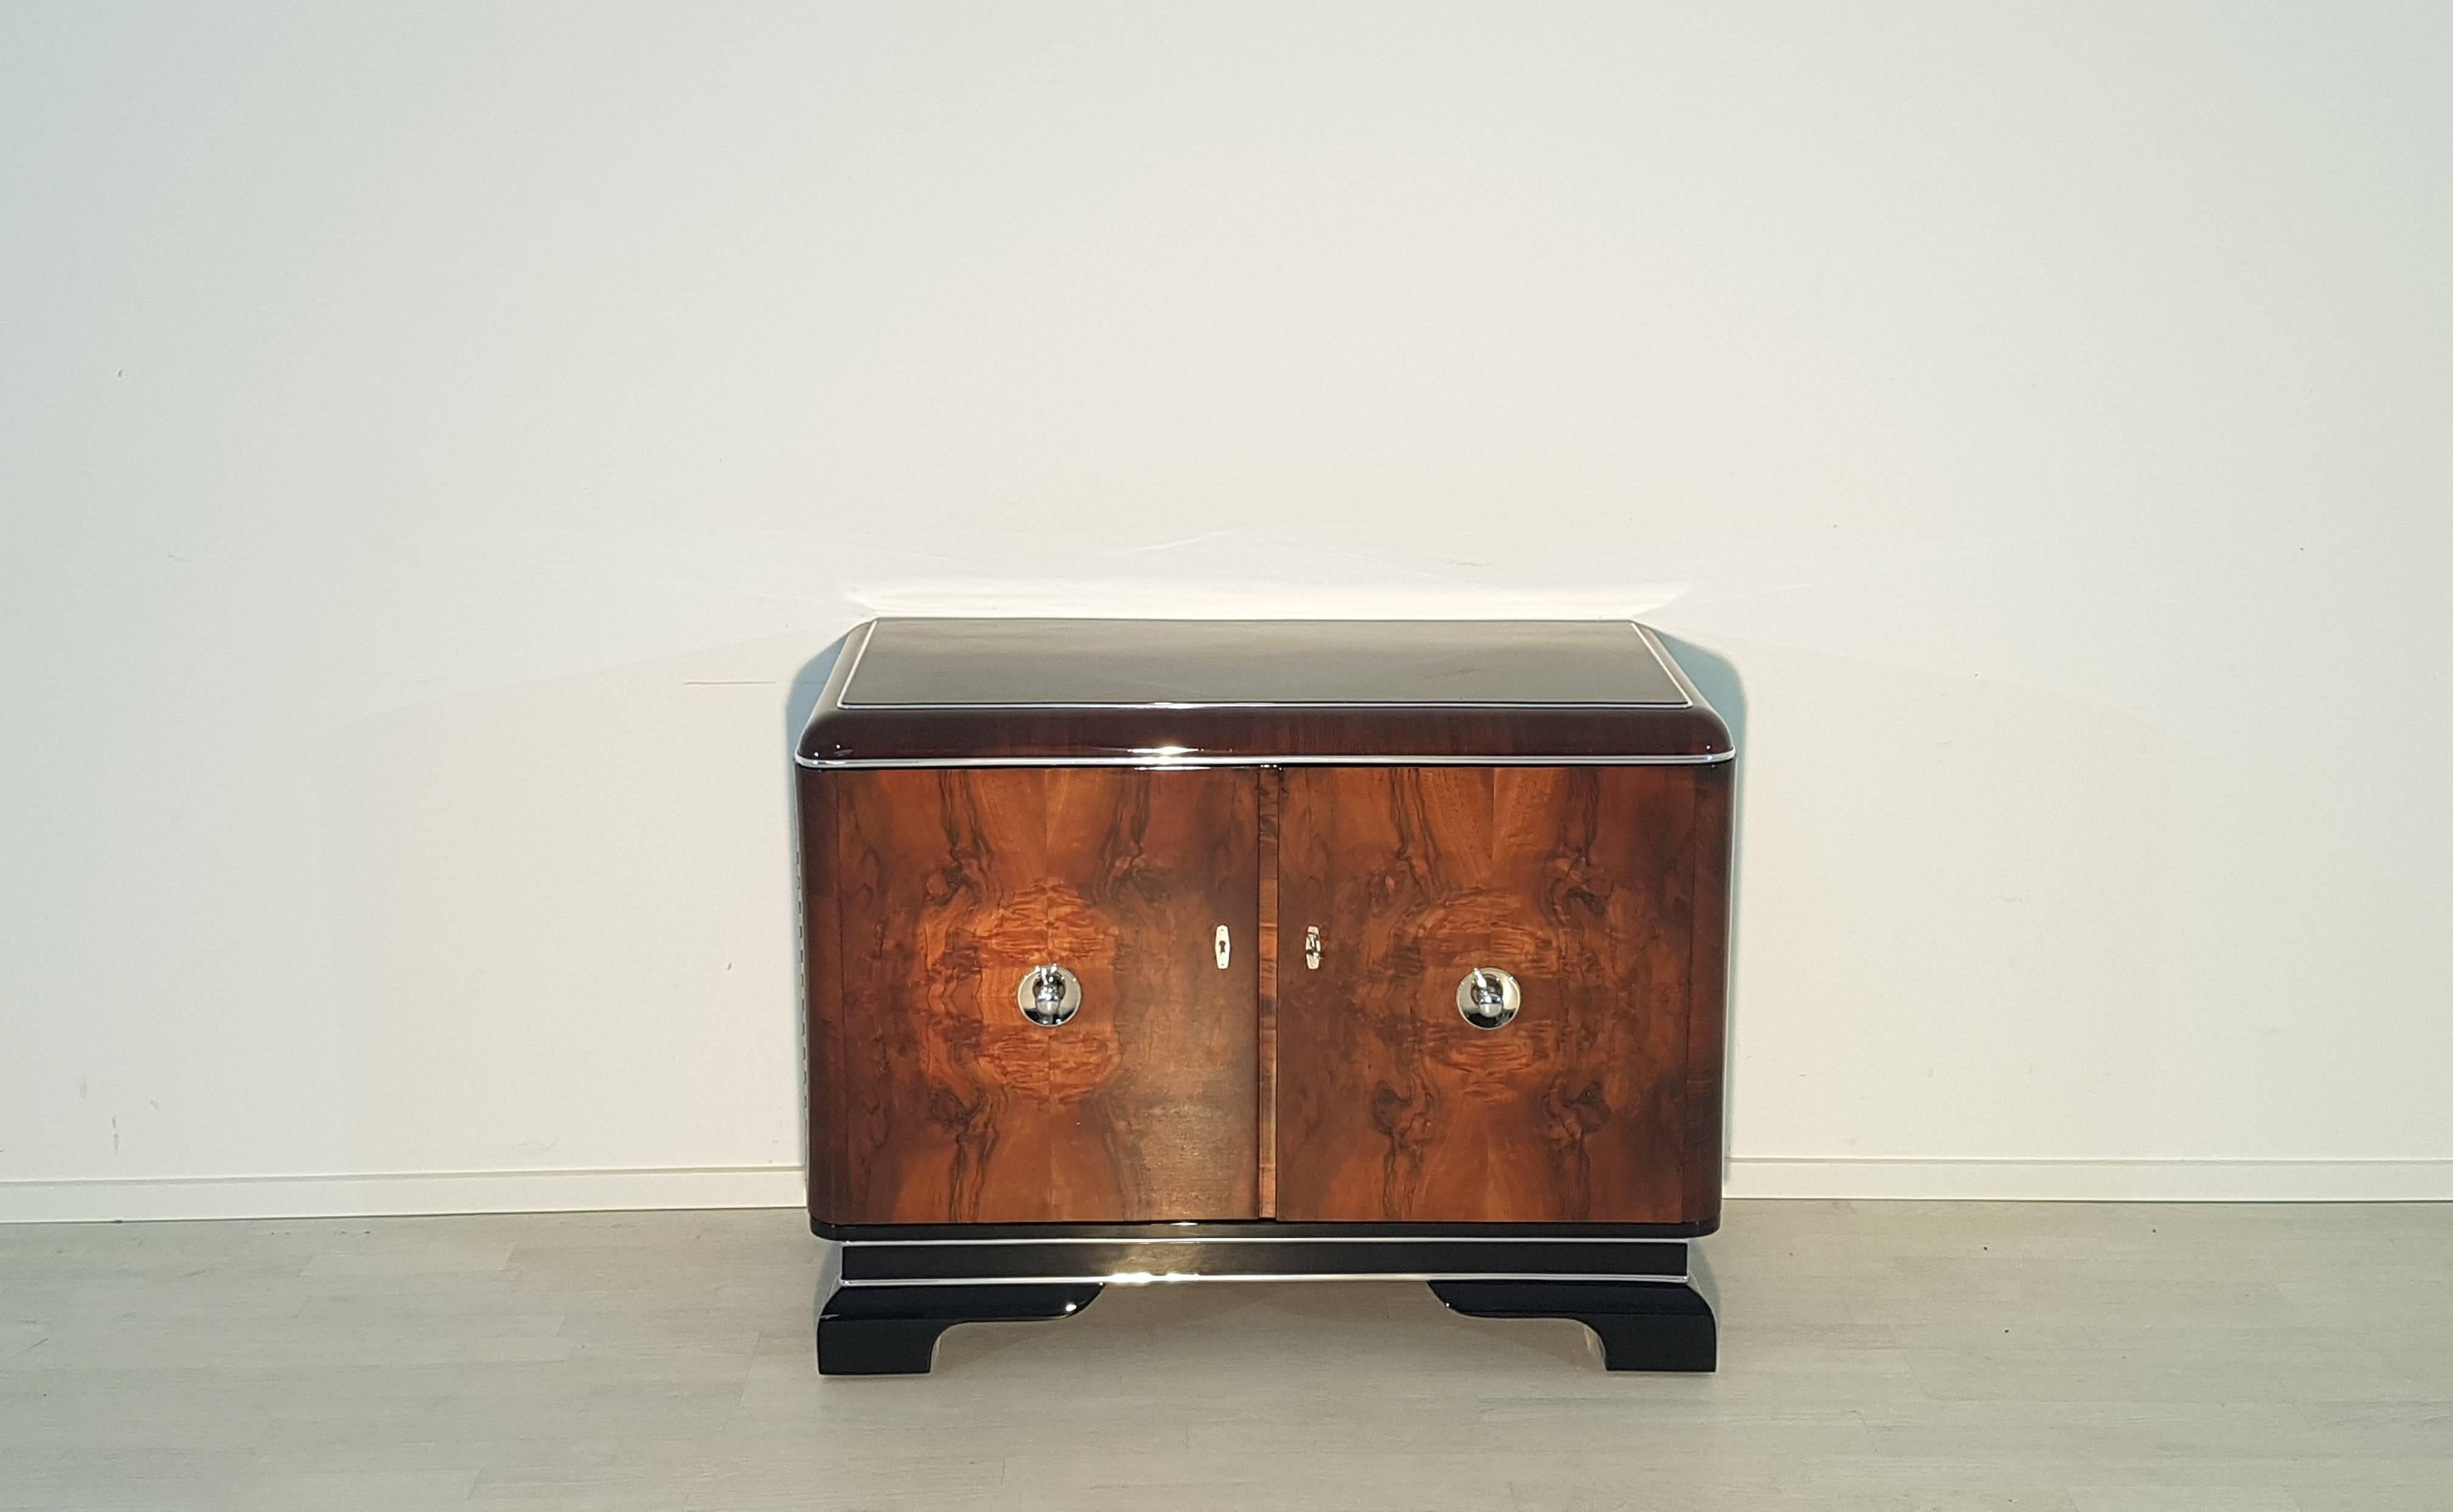 Wonderful Art Deco commode or small dresser with walnut doors and luxurious chrome handles. This unique original piece from the 1920s convinces with its typical Art Deco design and with the great combination of black high gloss lacquer and luxurious